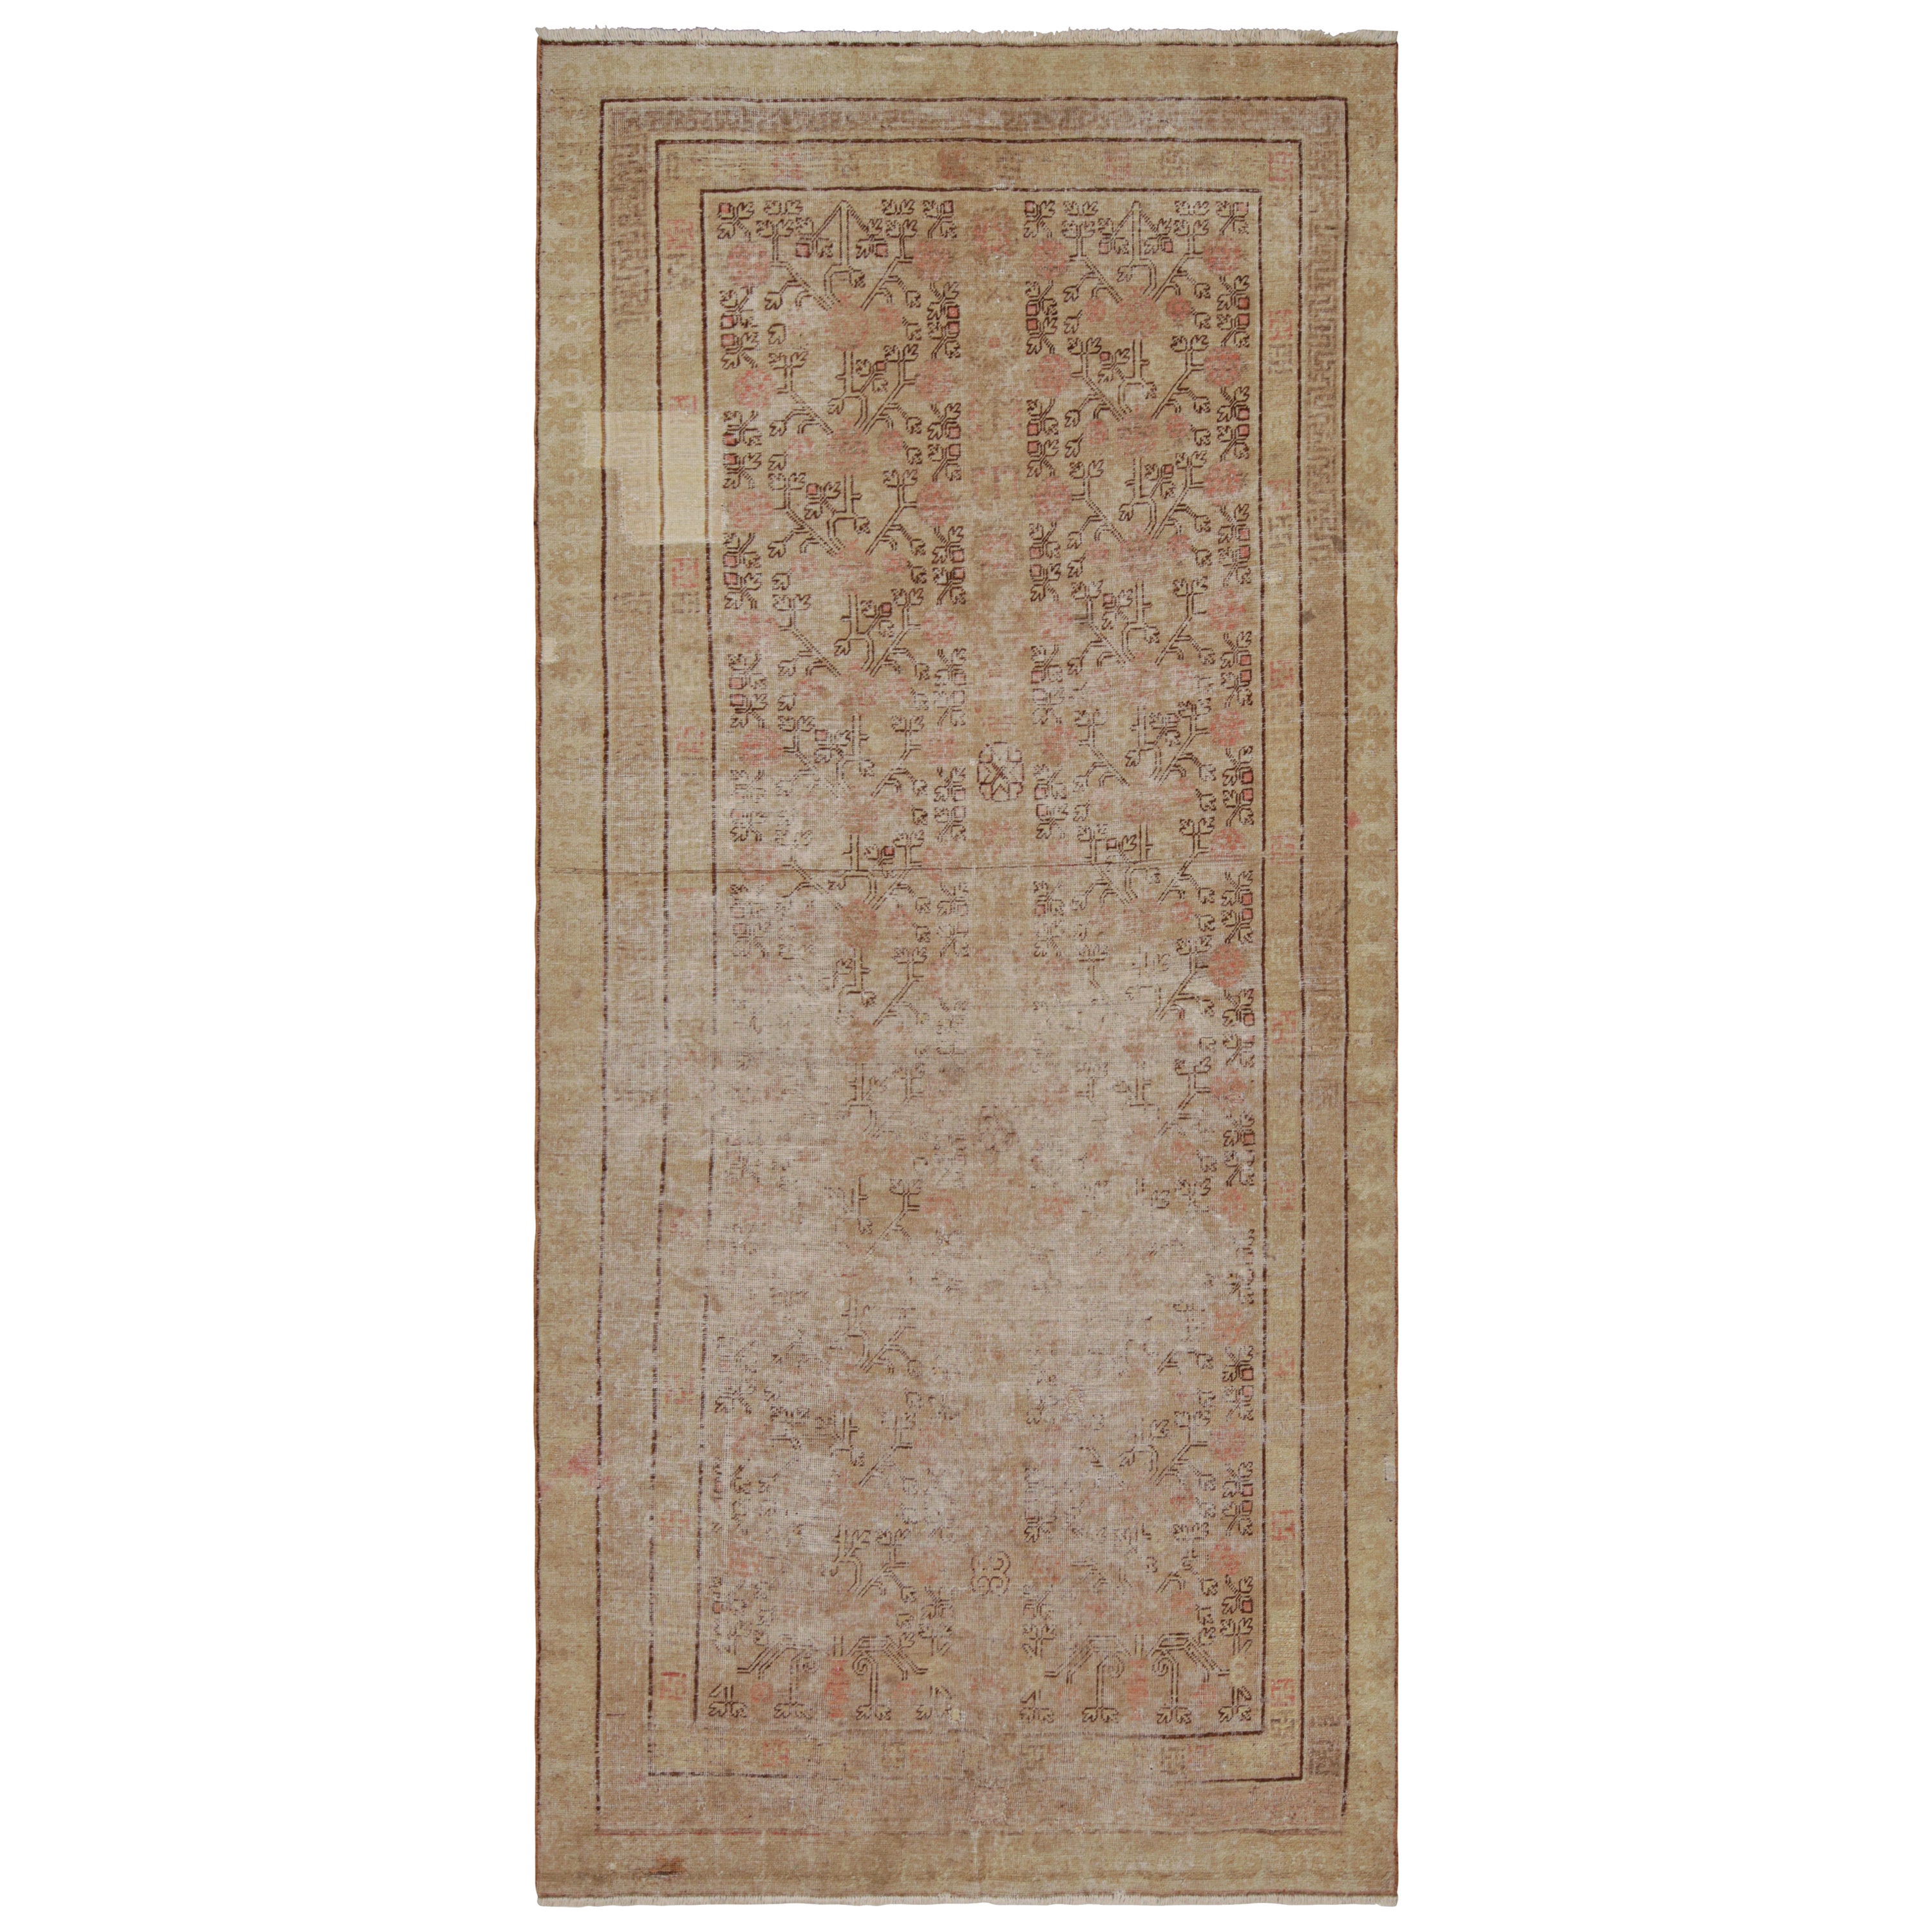 Antique Khotan Rug with Beige-Brown and Red Patterns by Rug & Kilim For Sale